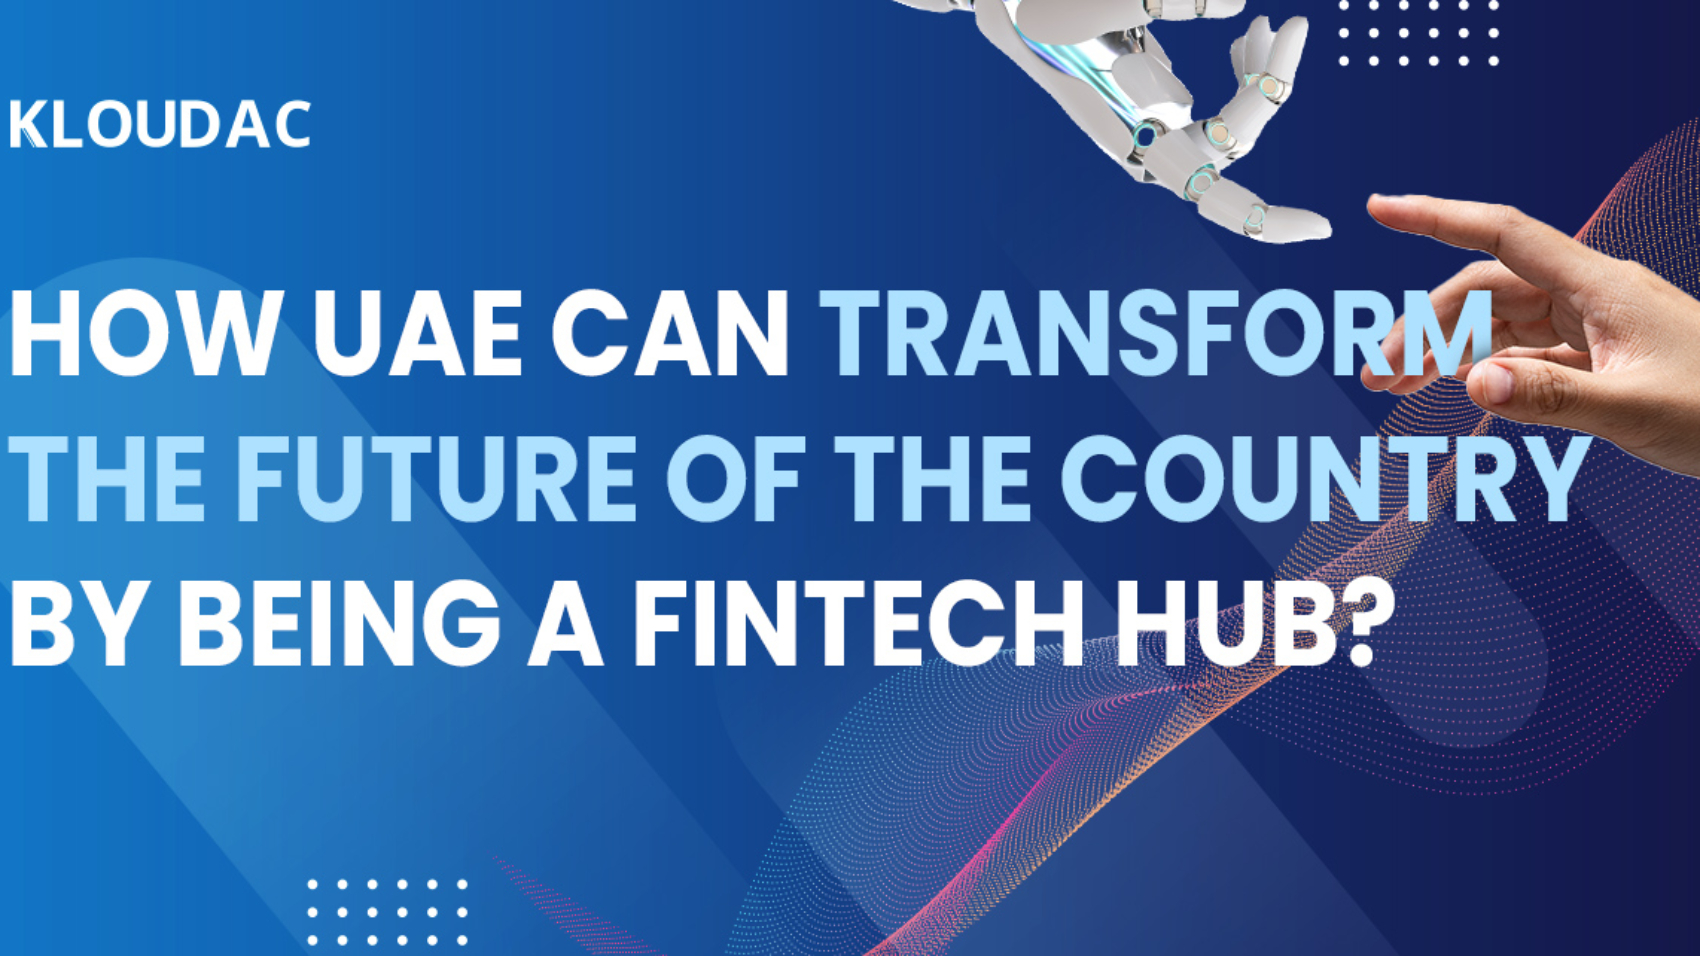 How can UAE transform the future of the country by being a fintech hub?